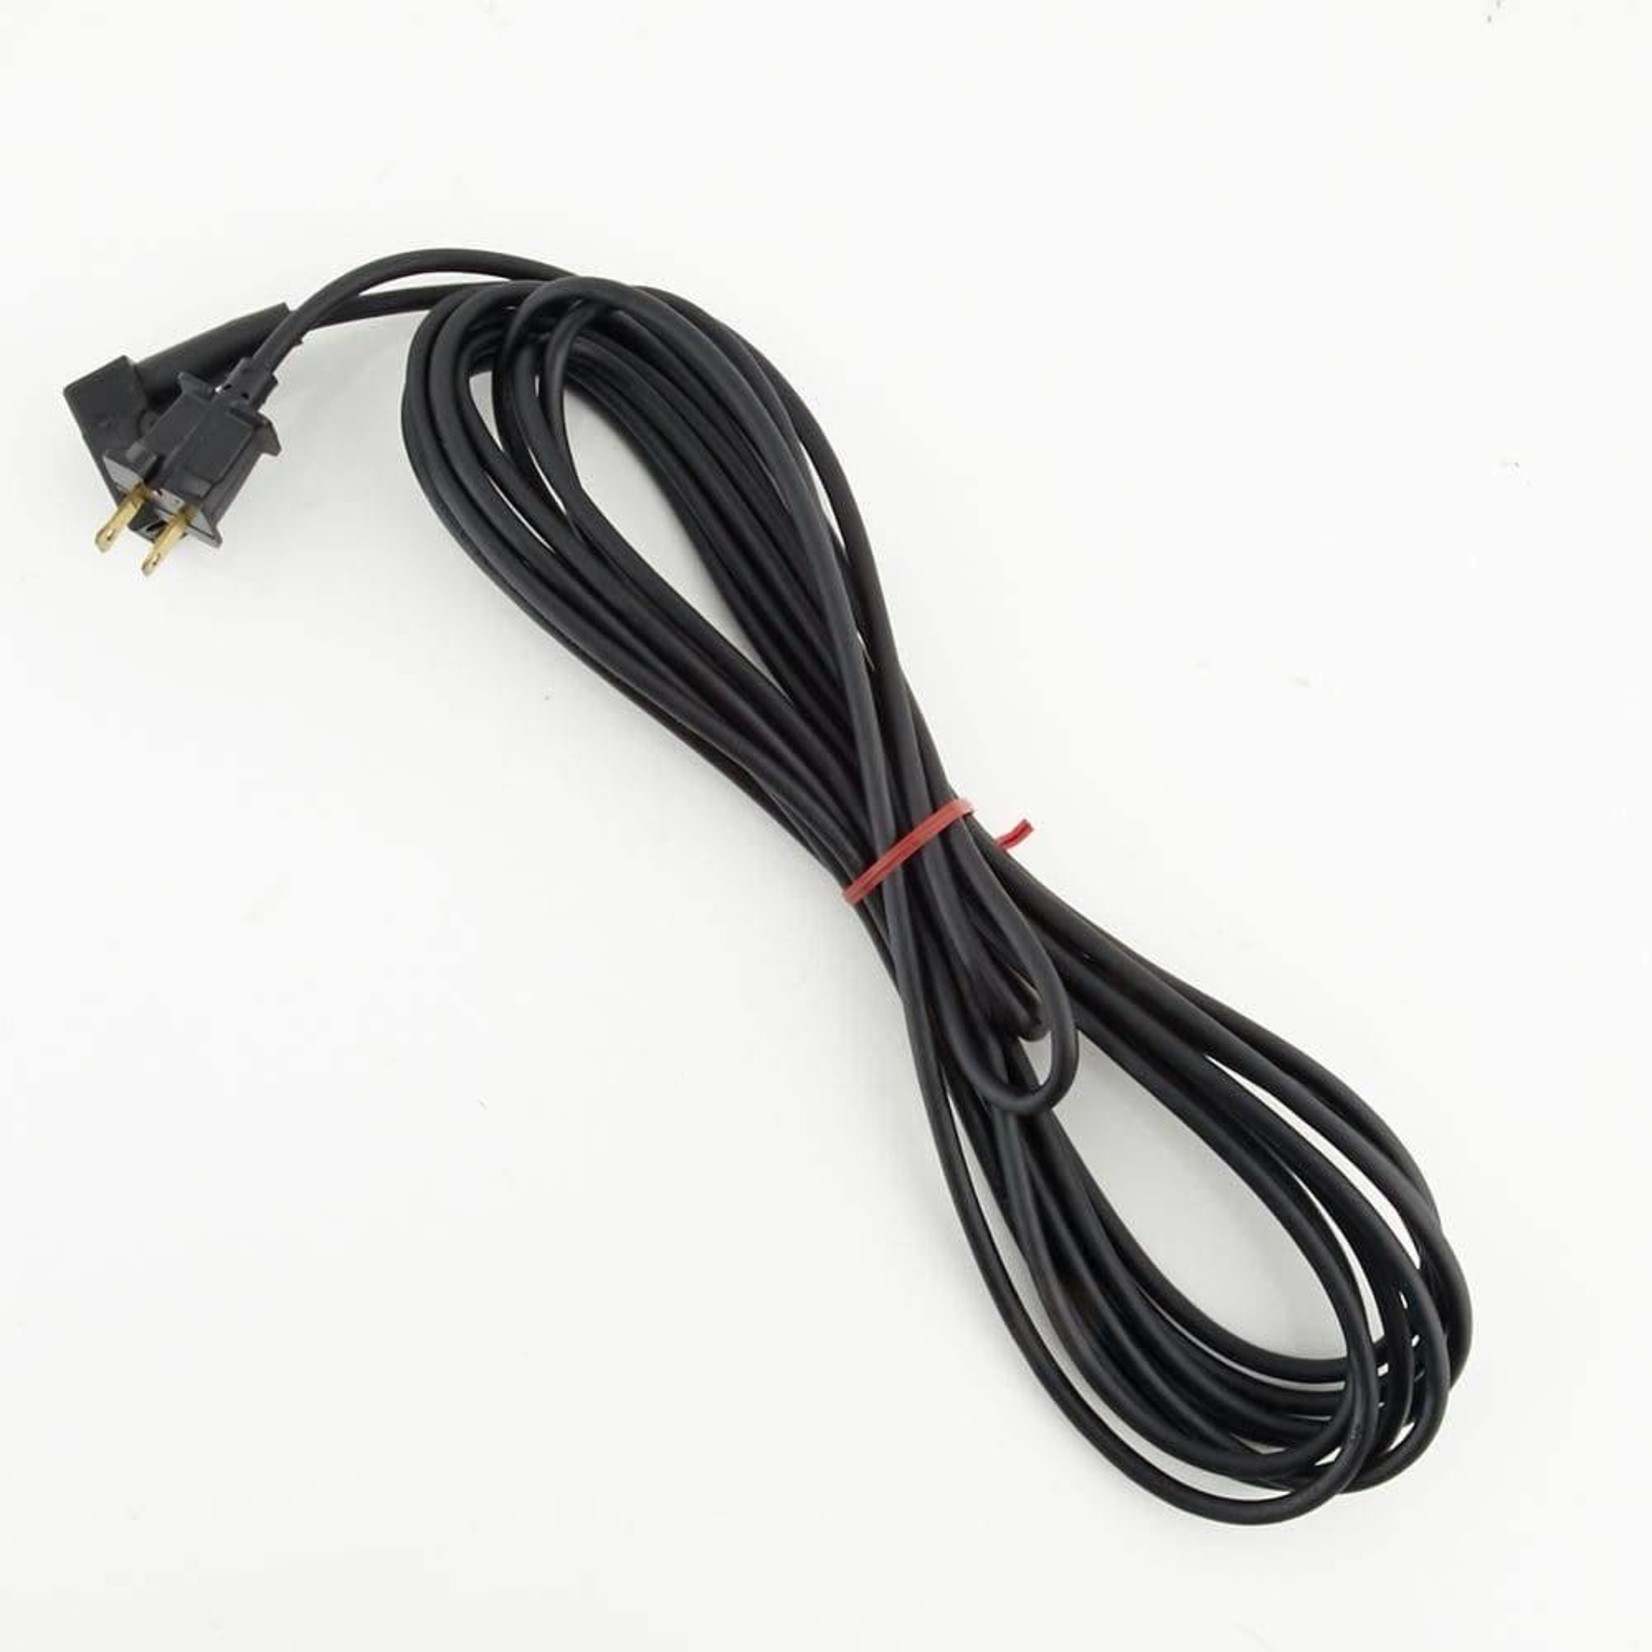 Hoover Genuine Hoover Power Cord For Concept II *NO LONGER AVAILABLE*